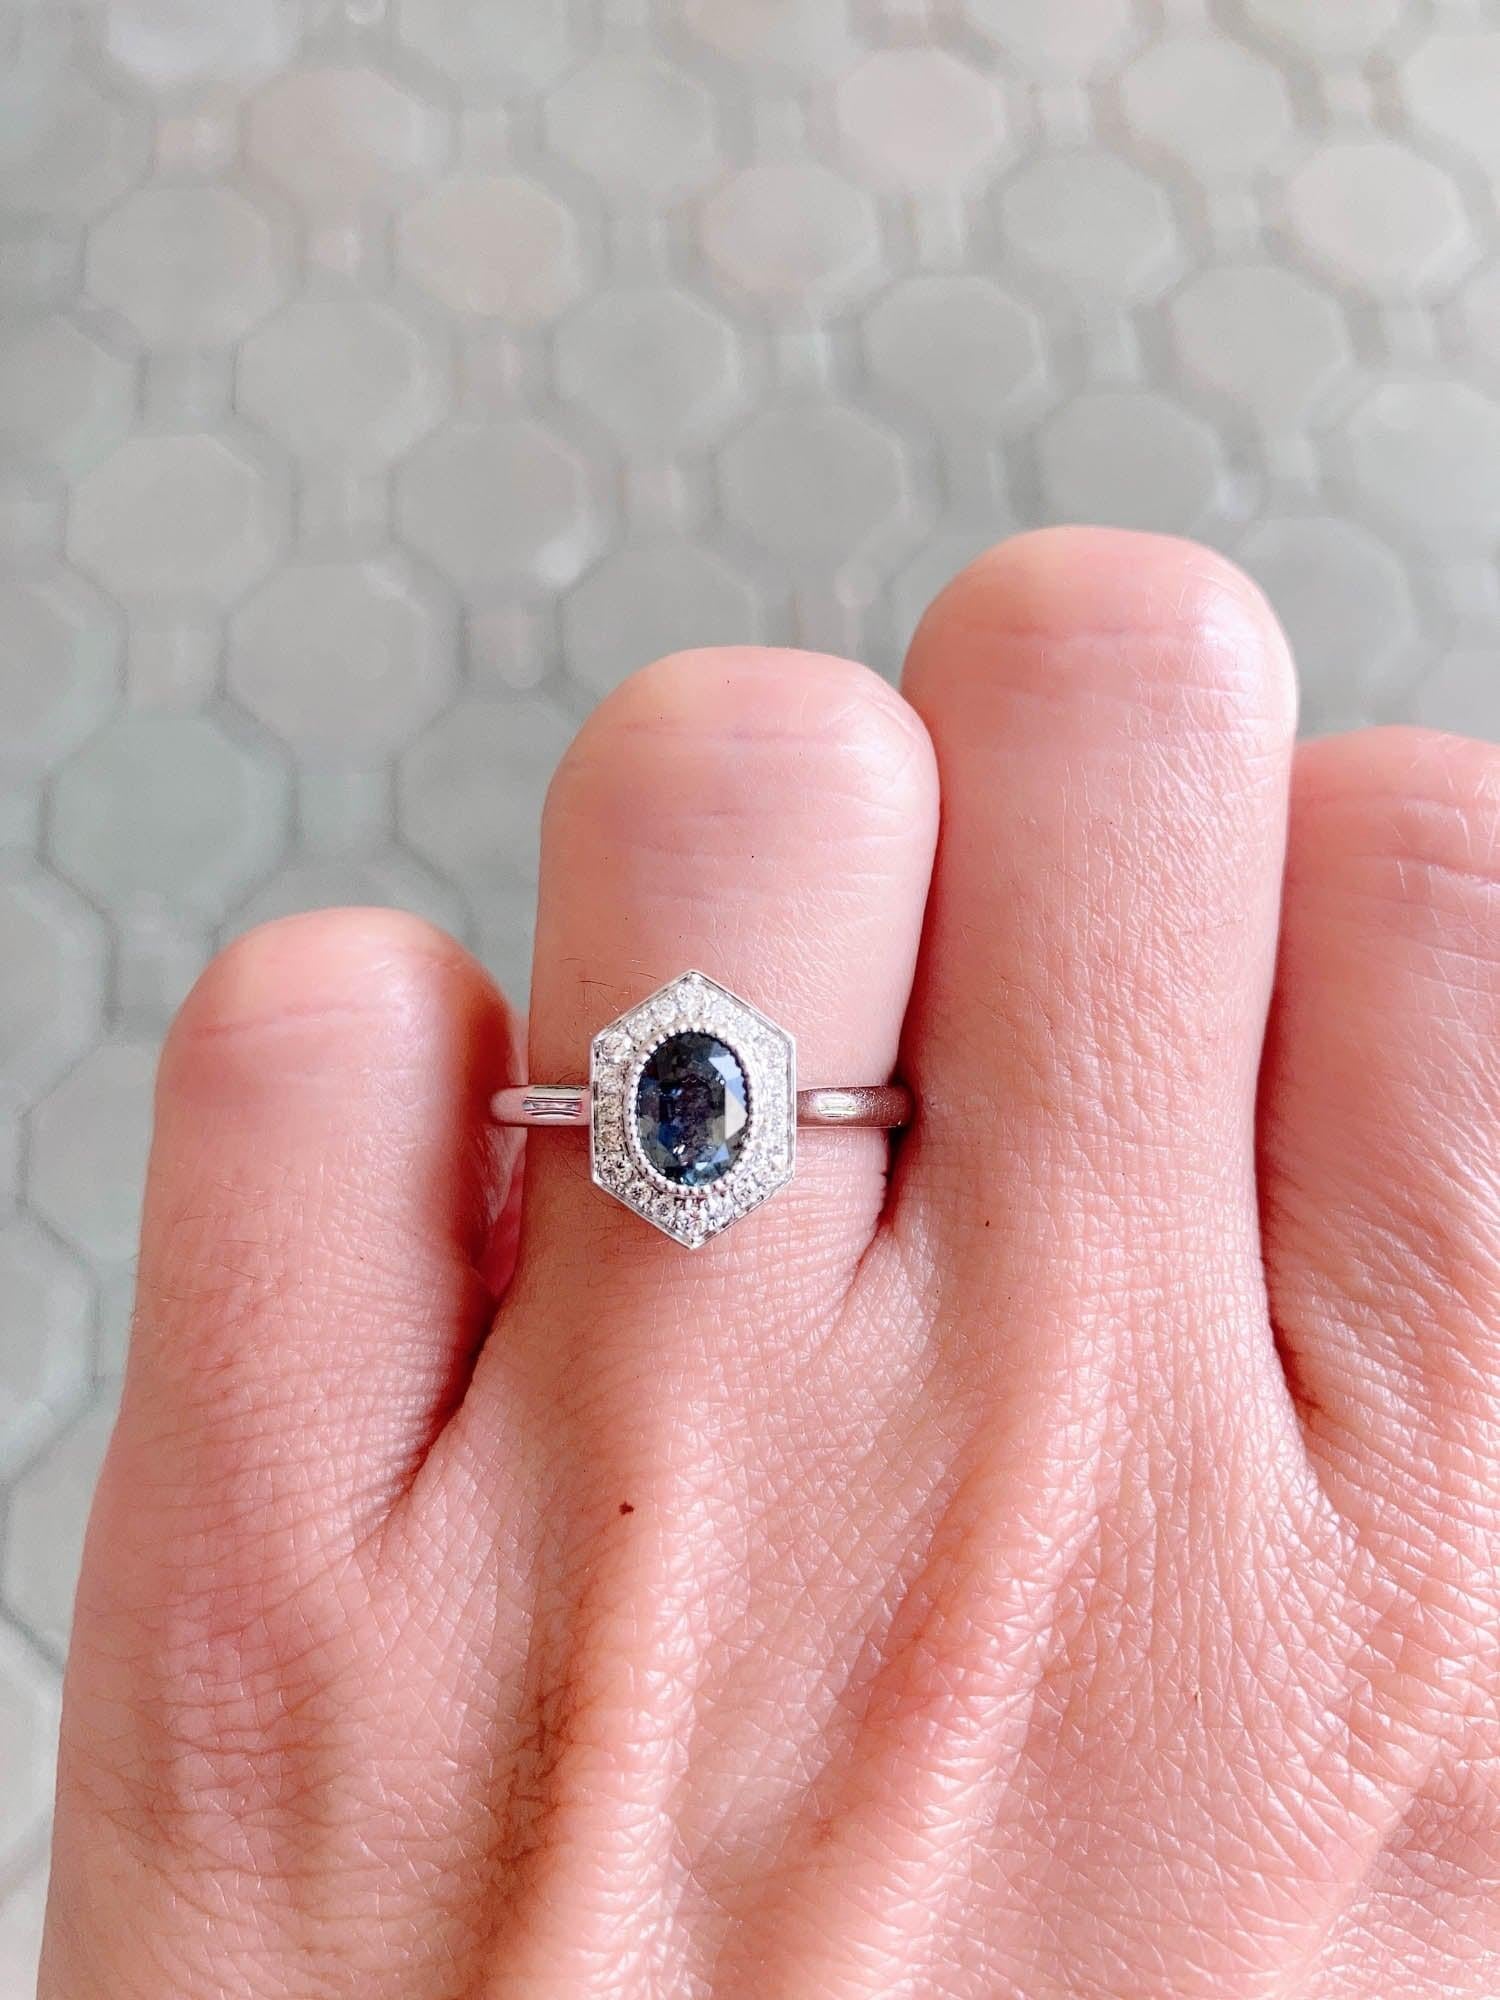 ♥ Solid 14k white gold ring set with a beautiful oval-shaped teal Montana sapphire with diamond halo
♥ The ring setting measures 11.6 mm in length, 8.6 mm in width, sits 5.3 mm tall on the finger

♥ US Size 7 (Free resizing up or down 1 size)
♥